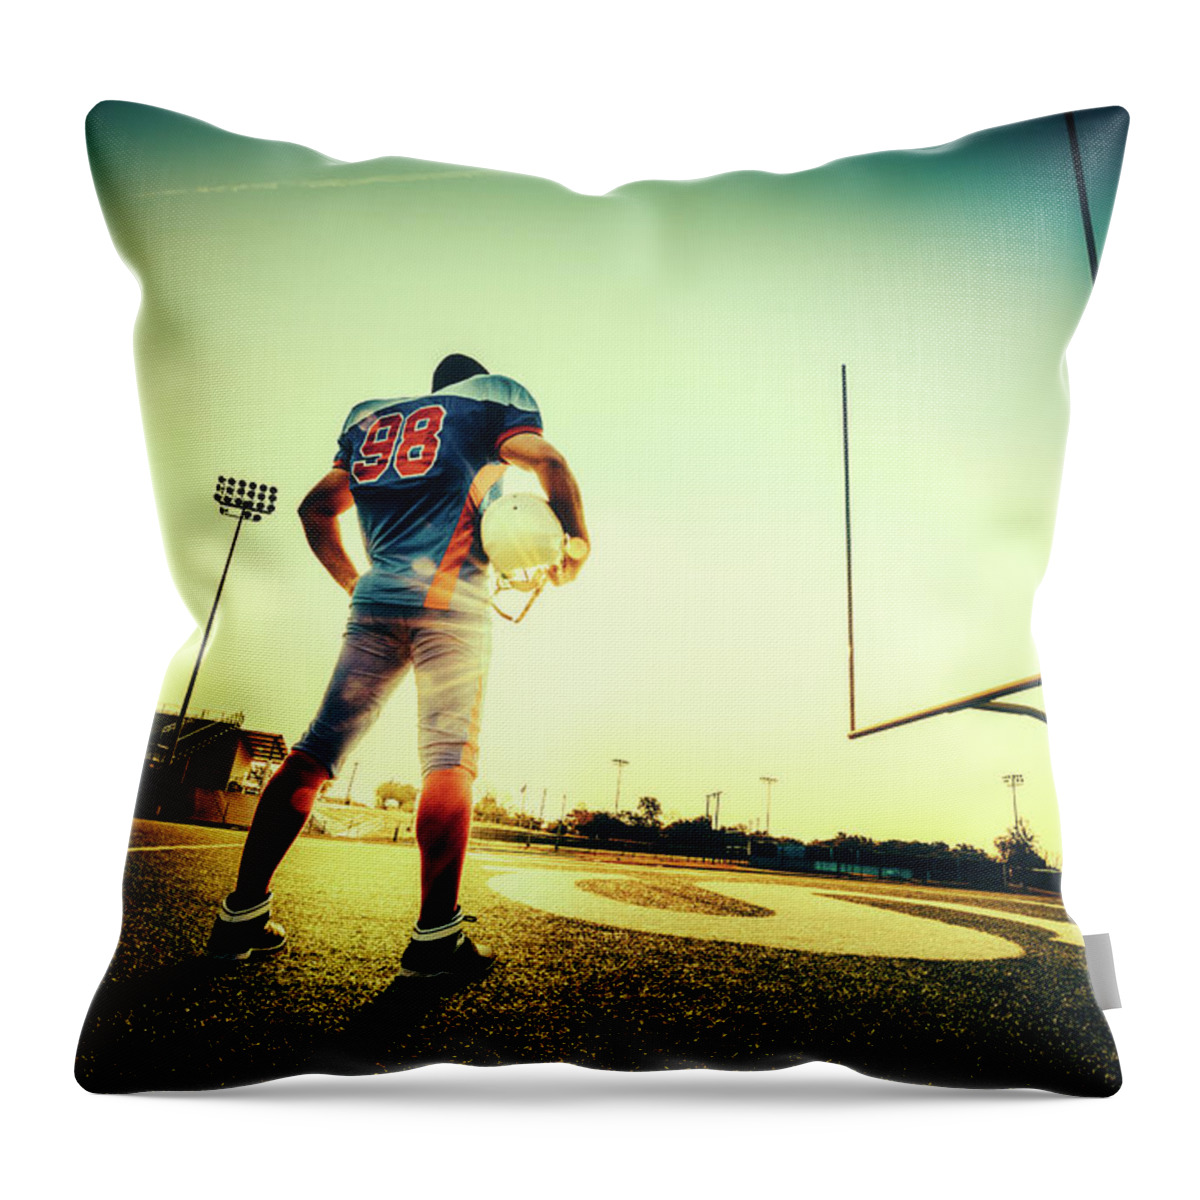 Headwear Throw Pillow featuring the photograph American Football Player by Ferrantraite